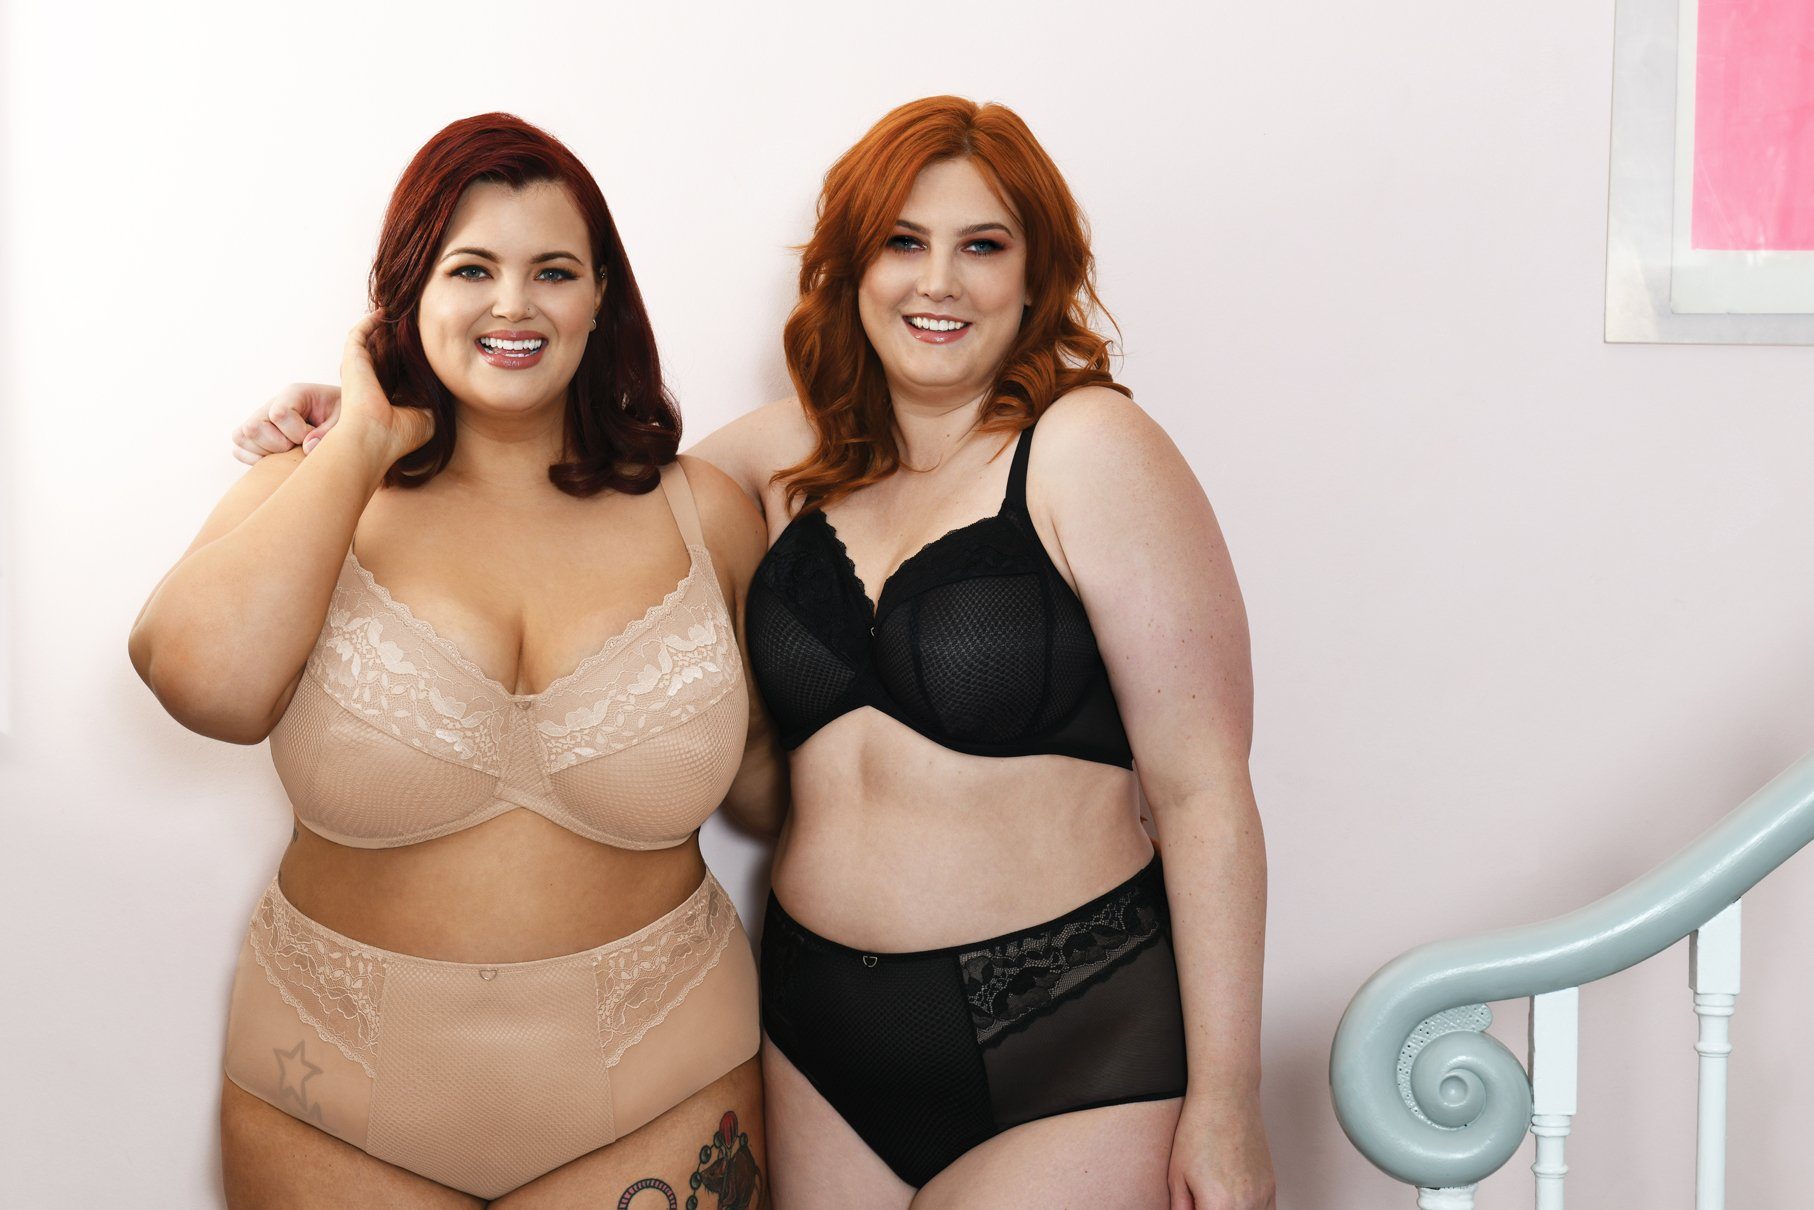 Wholesale dd cup size bra - Offering Lingerie For The Curvy Lady 